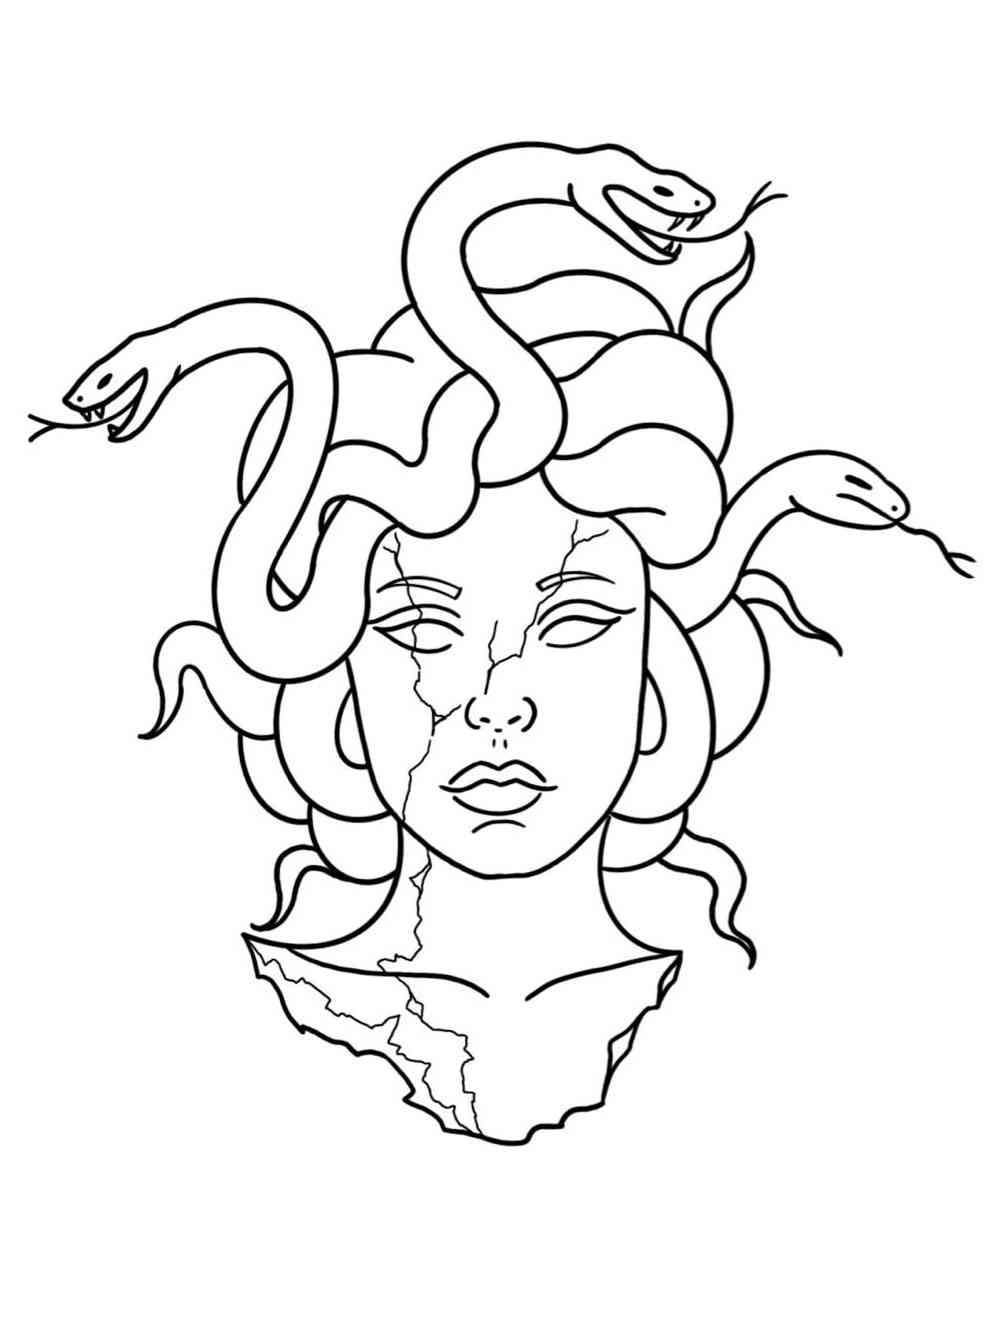 Medusa coloring pages